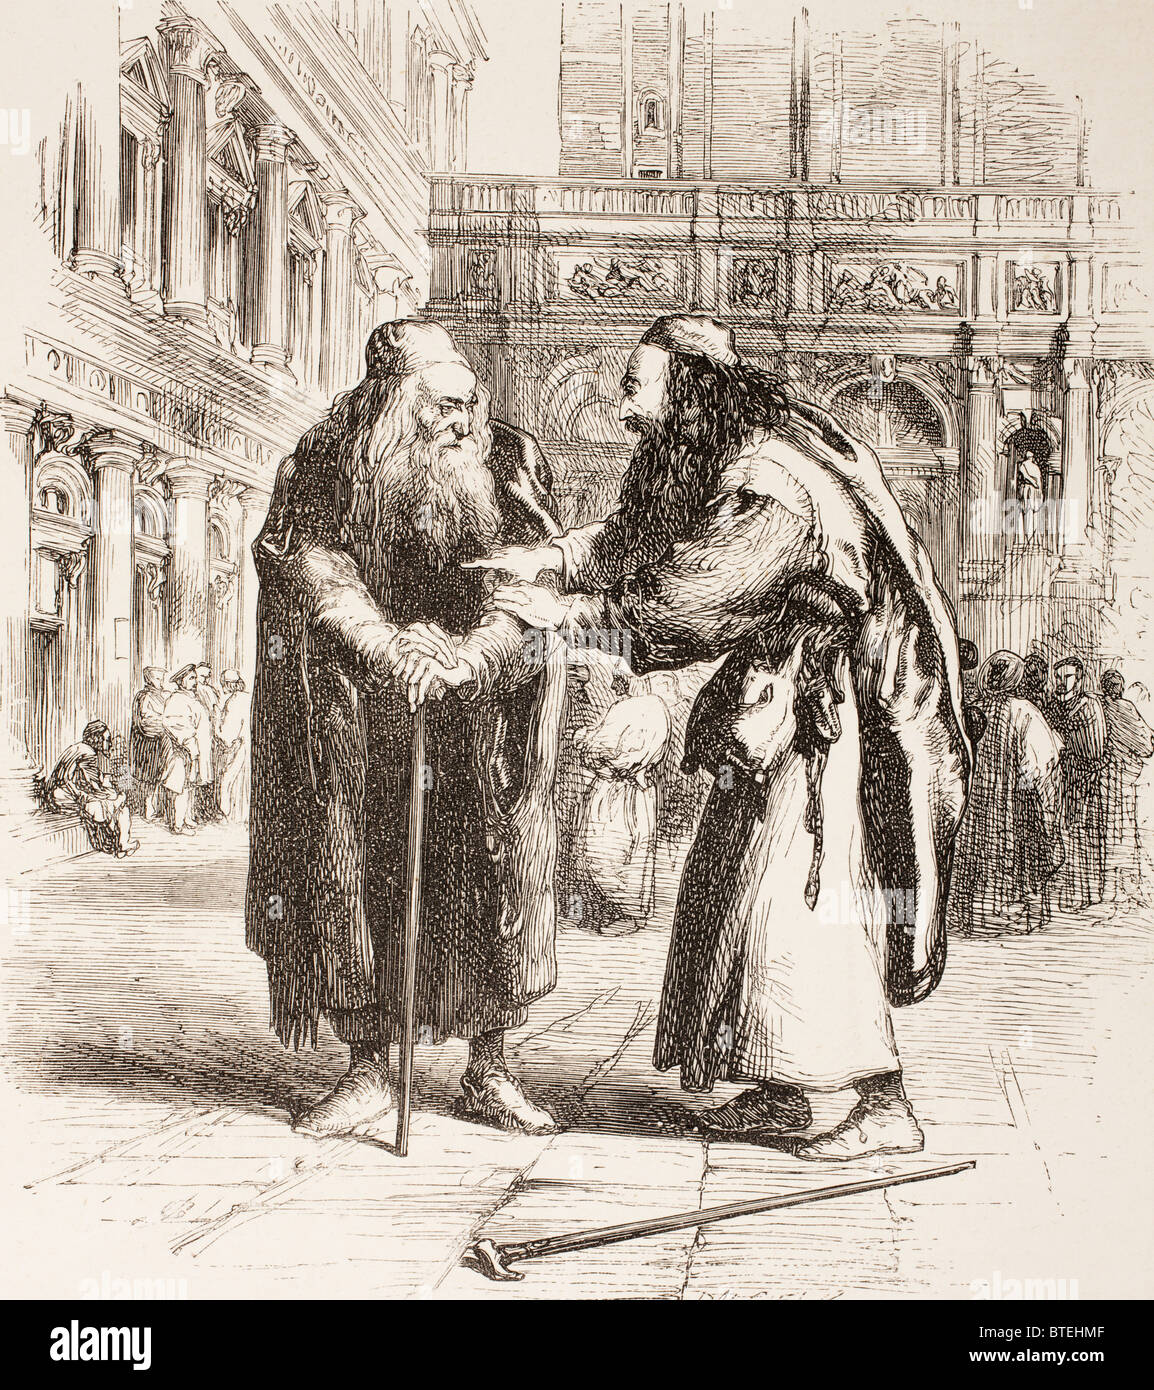 Illustration by Sr John Gilbert for The Merchant of Venice, by William Shakespeare. Shylock and Tubal meet in the street. Stock Photo